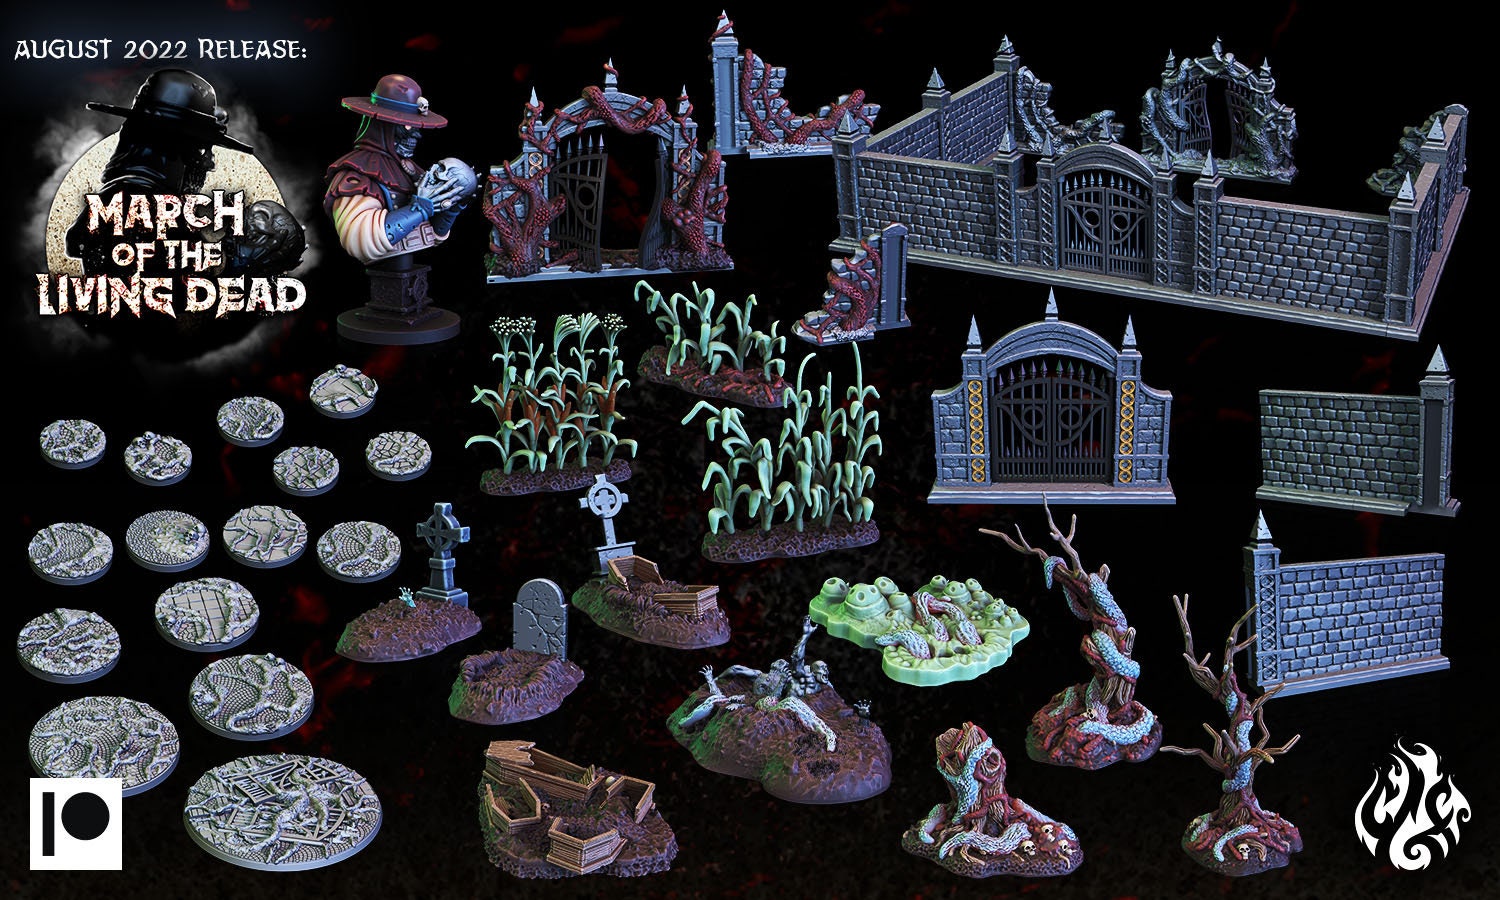 Zombie Guard - Crippled God Foundry - March of the Living Dead 